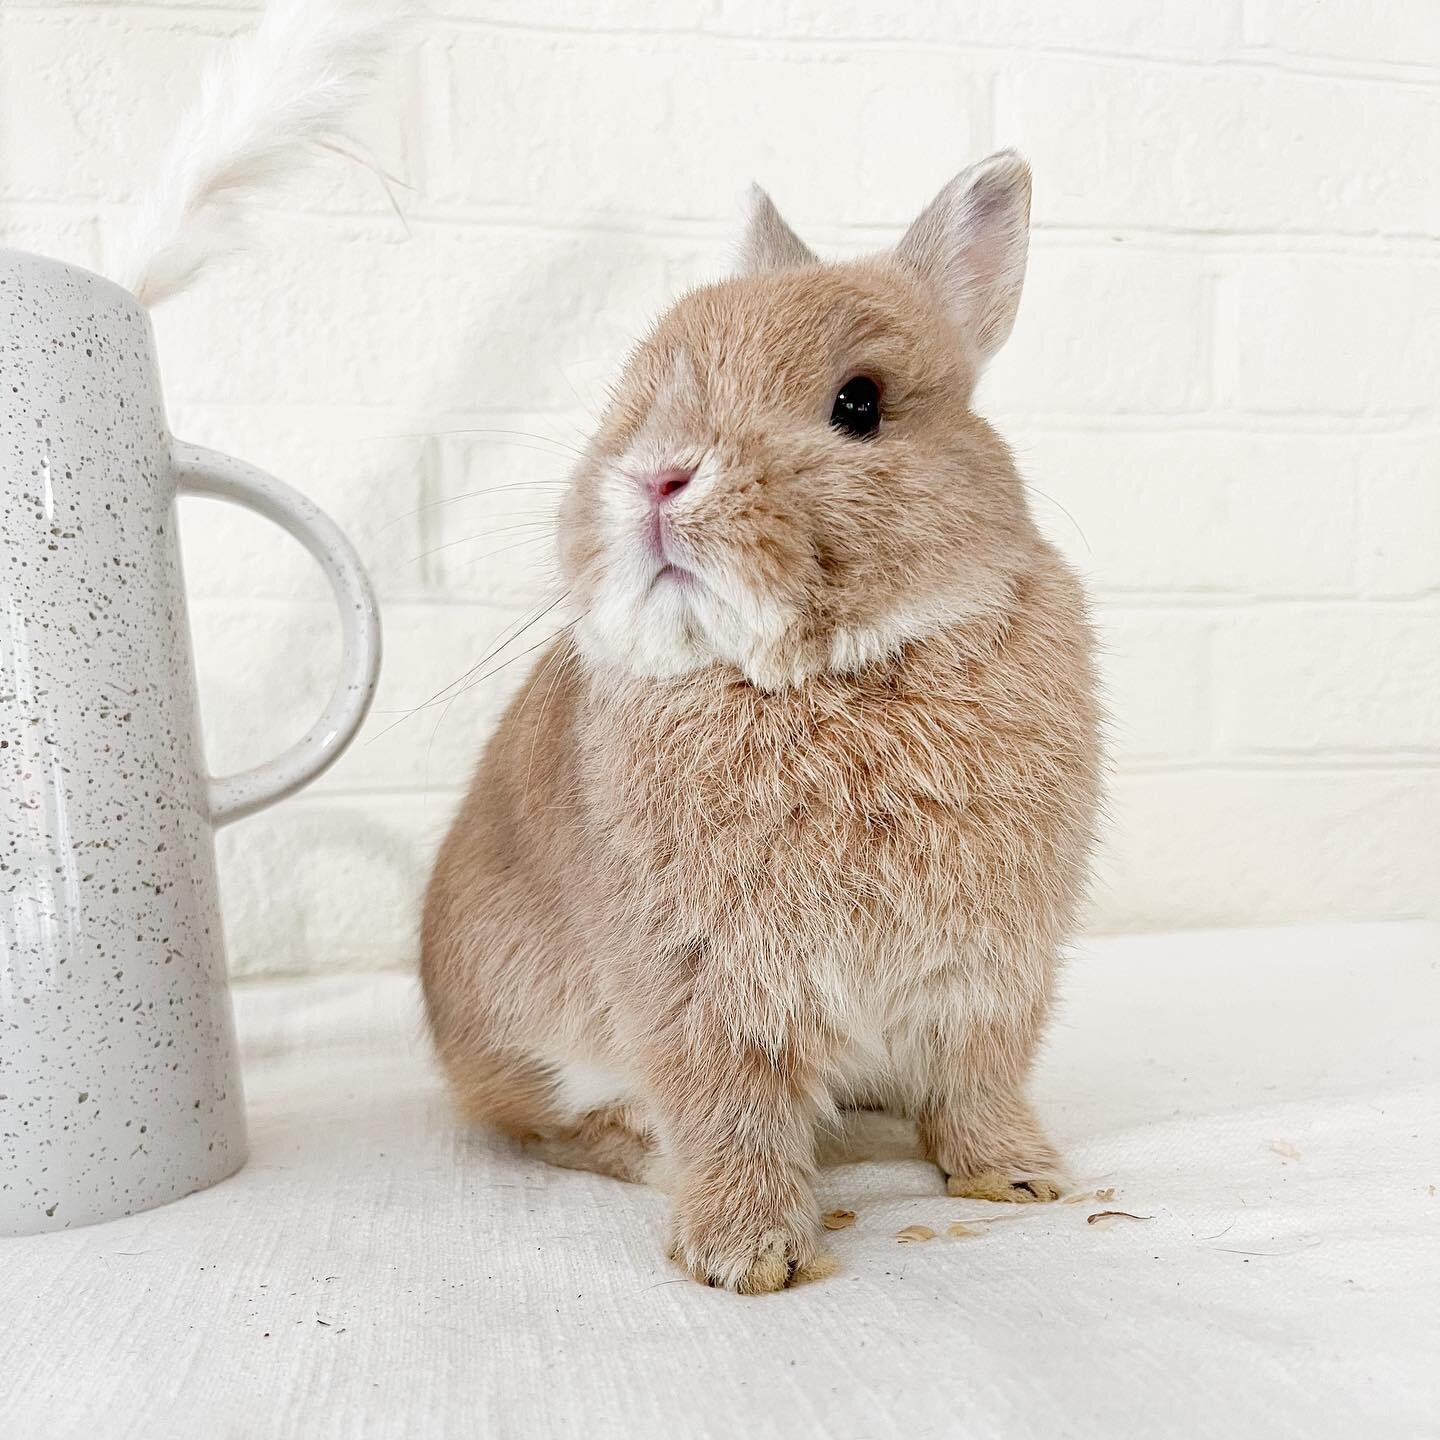 @tamemees_rabbitry Apollo, our most recent addition to our orange and fawn lines. He&rsquo;s already a dad three times this season!  I can&rsquo;t wait to see how his babies grow up. 

#netherlanddwarf #netherlanddwarfbunny #nethie #fawnnethie #rabbi